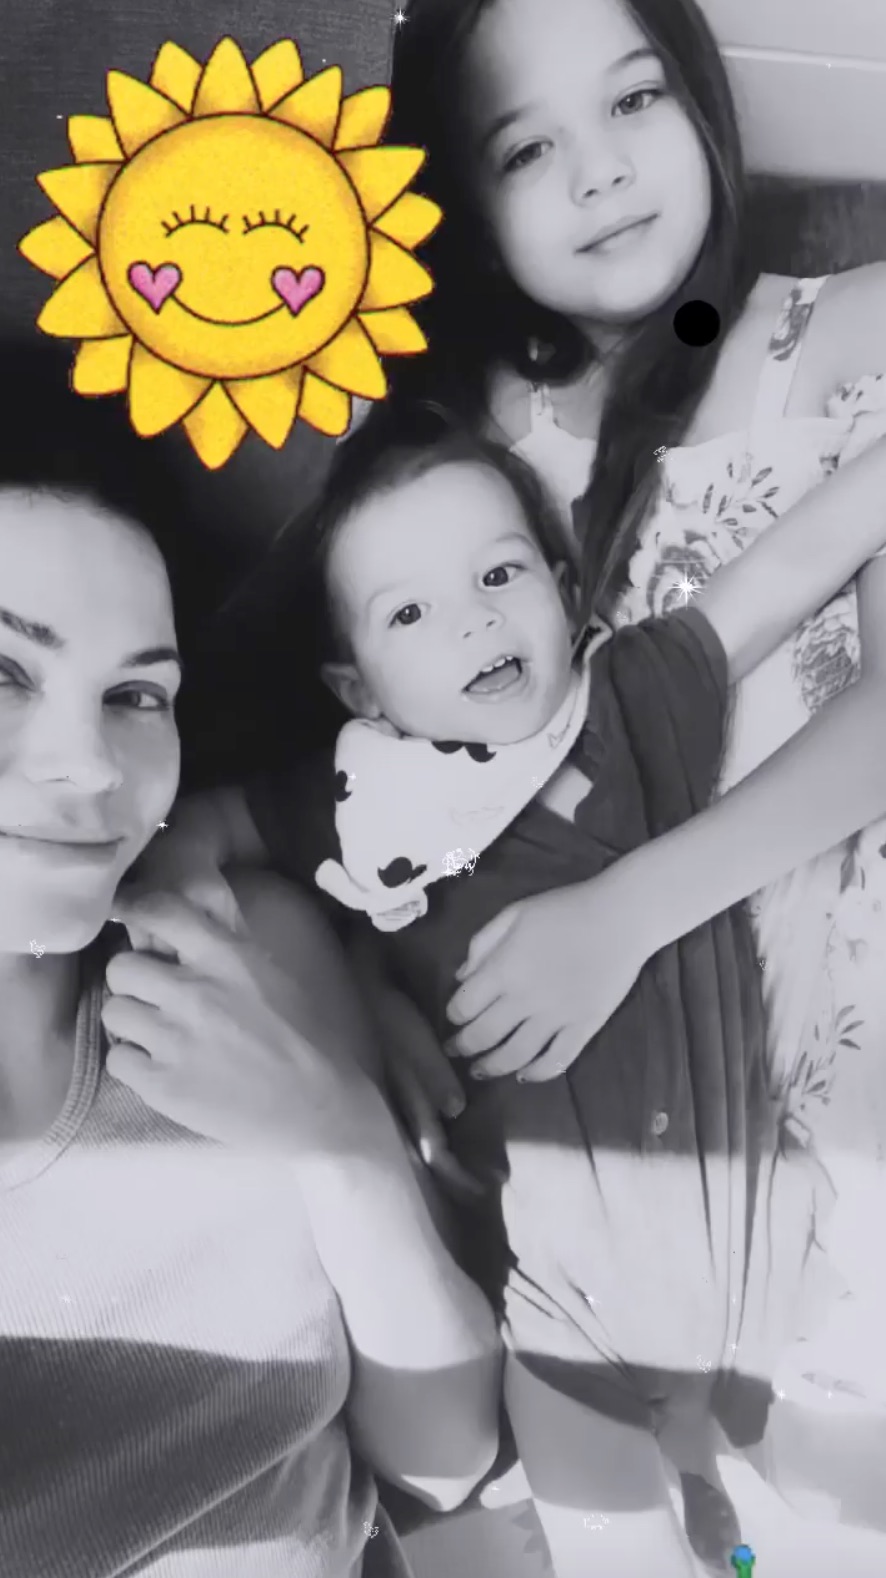 Jenna Dewan Shares Sweet New Shot With Daughter Everly and Son Callum